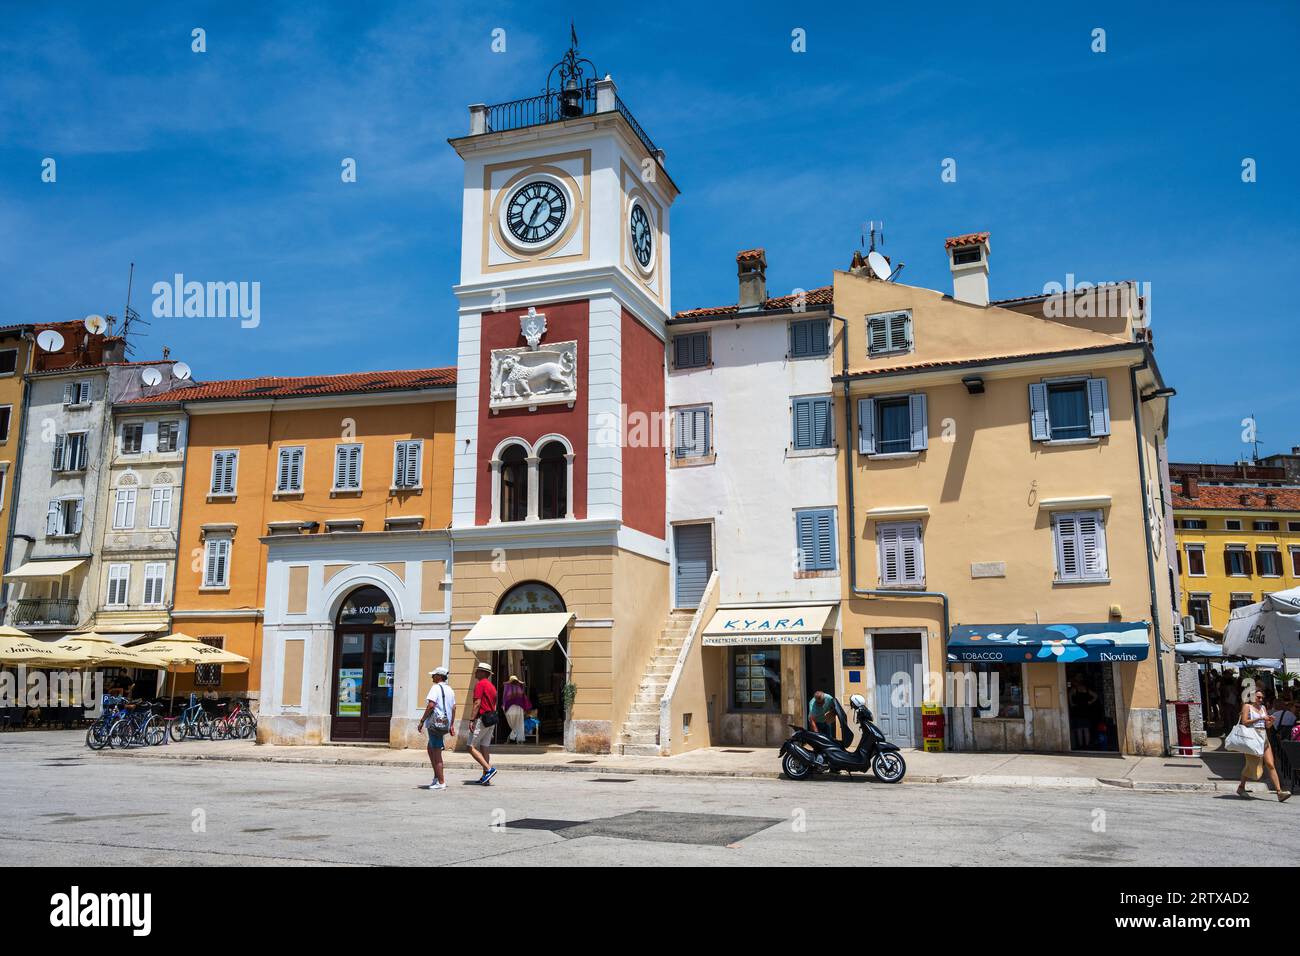 Clock Tower (Uhrturm) on Marshal Tito Square in the old town of Rovinj on the Istrian Peninsula of Croatia Stock Photo